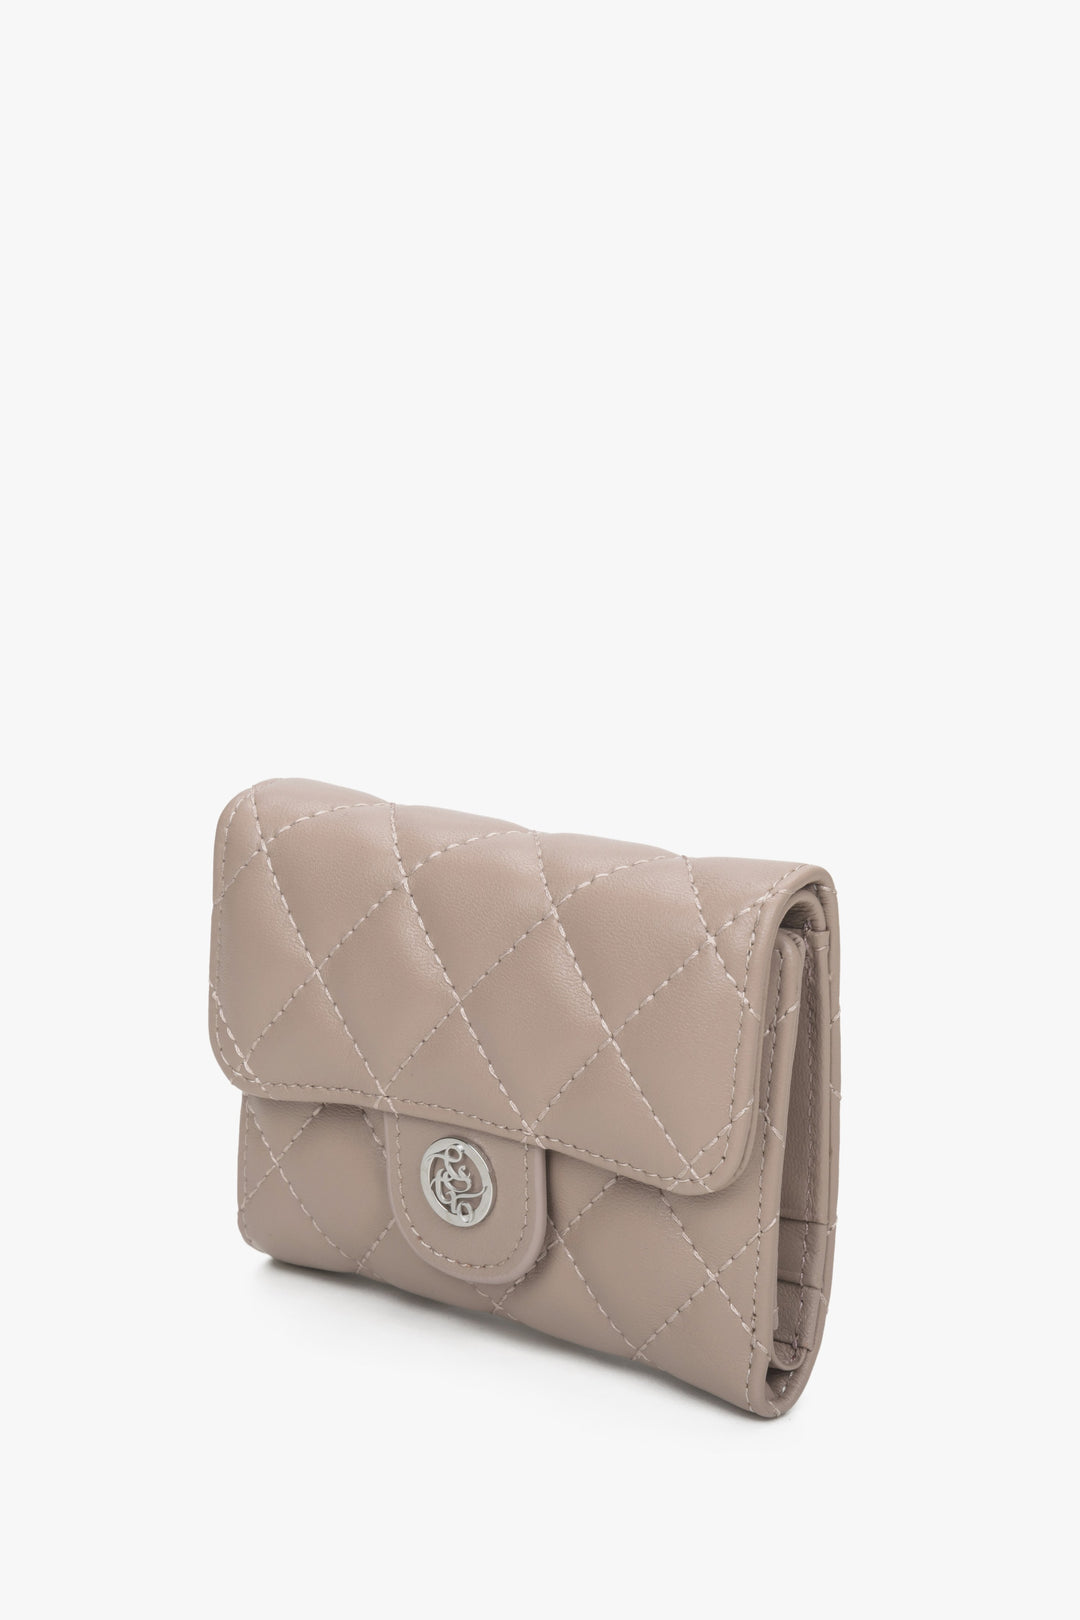 Women's tri-fold light pink wallet with embossing.